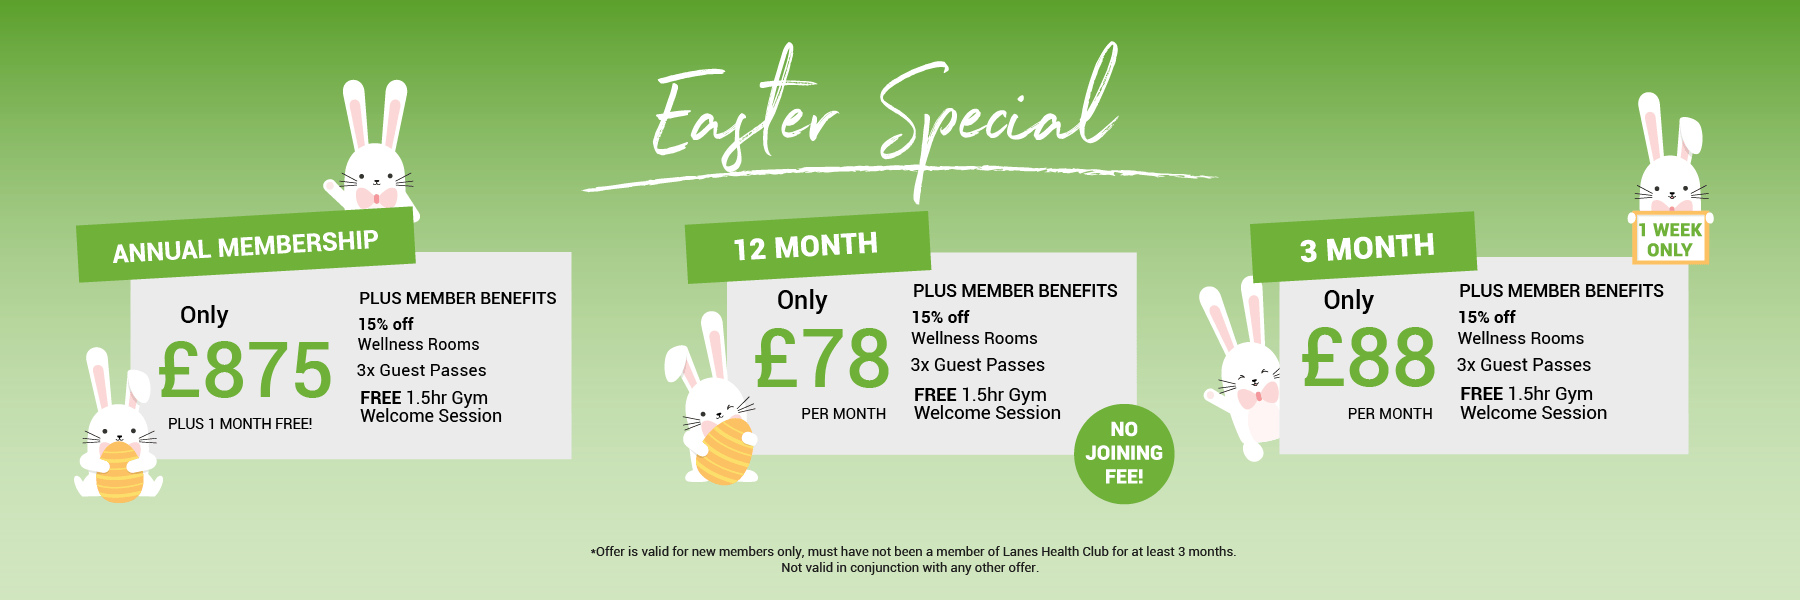 Easter promotion £78pm